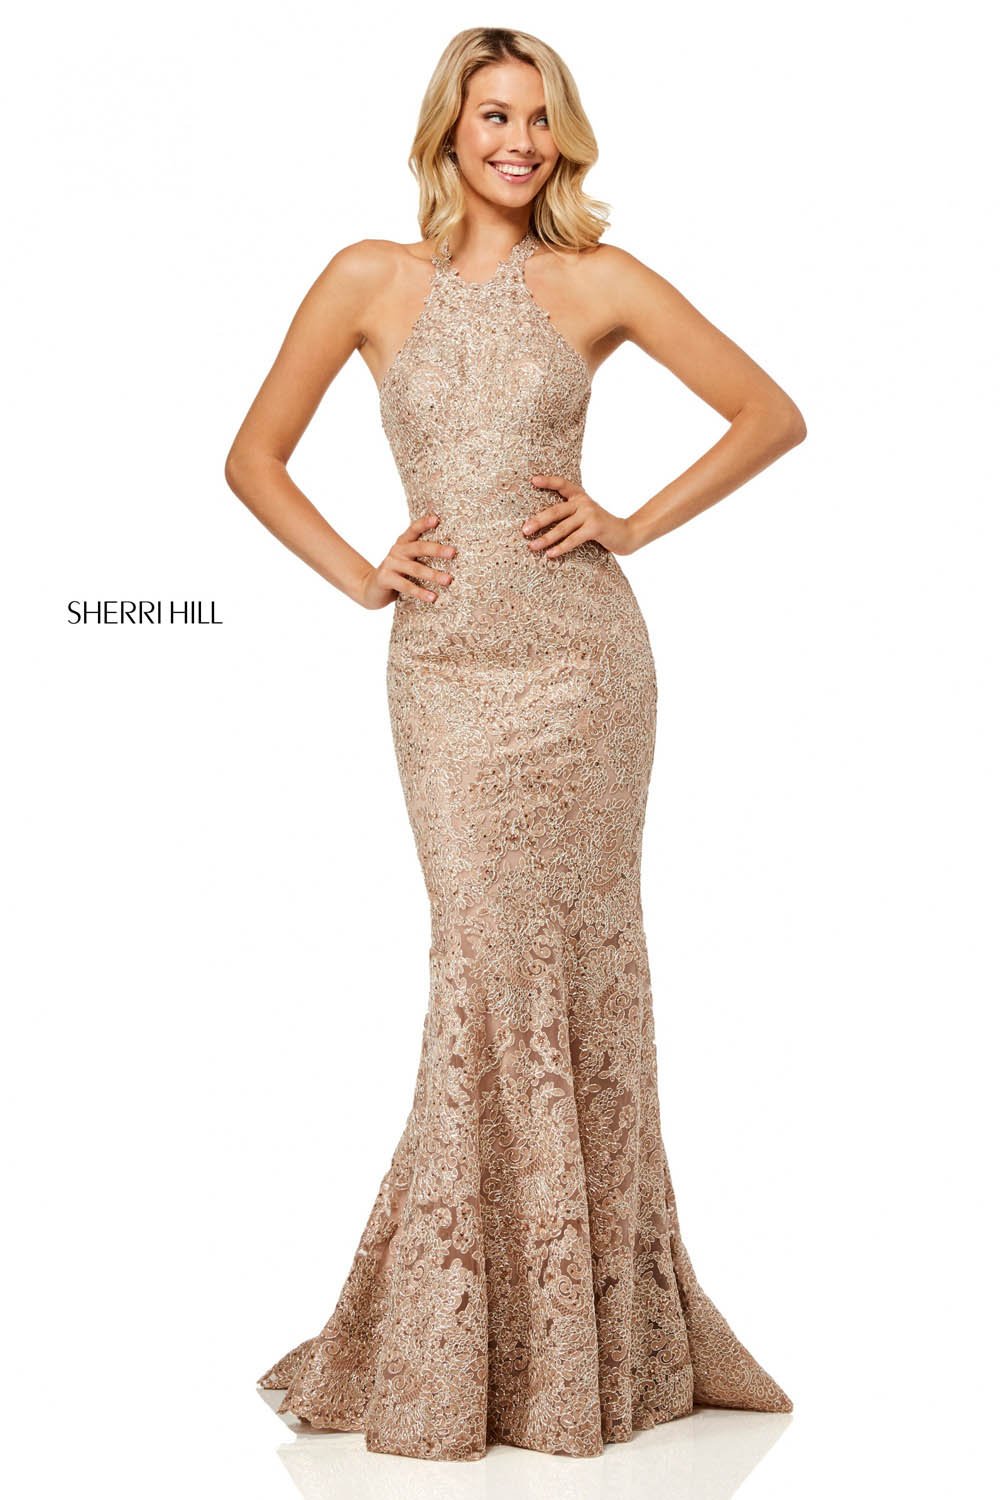 Sherri Hill 52644 dress images in these colors: Light Blue, Rose Gold, Gold.